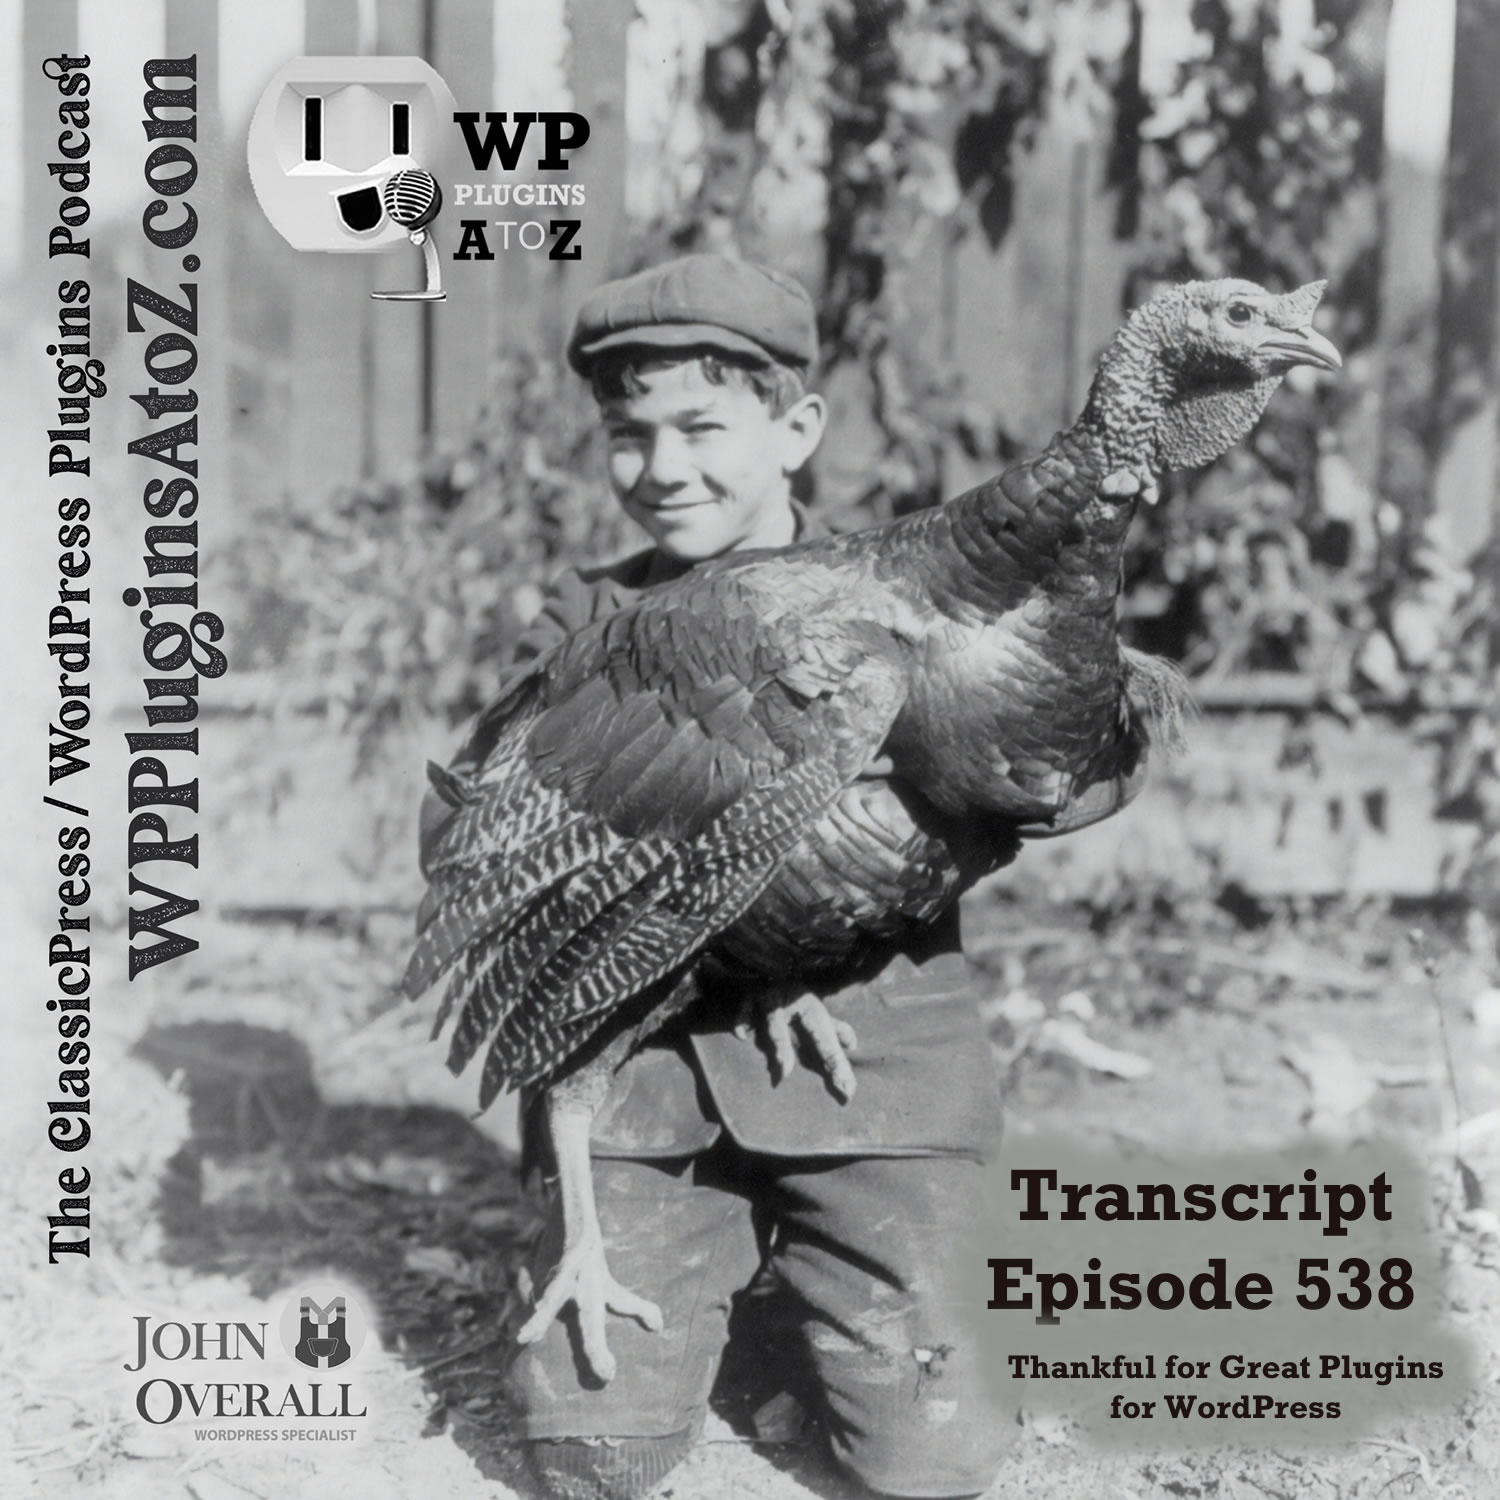 Transcript for Episode 538 and we have plugins for: Country Addons, Applying for Jobs, XMas says Hello!, Dokan Vendoring, Seed Tracing, QRing... and ClassicPress Options. It's all coming up on WordPress Plugins A-Z!